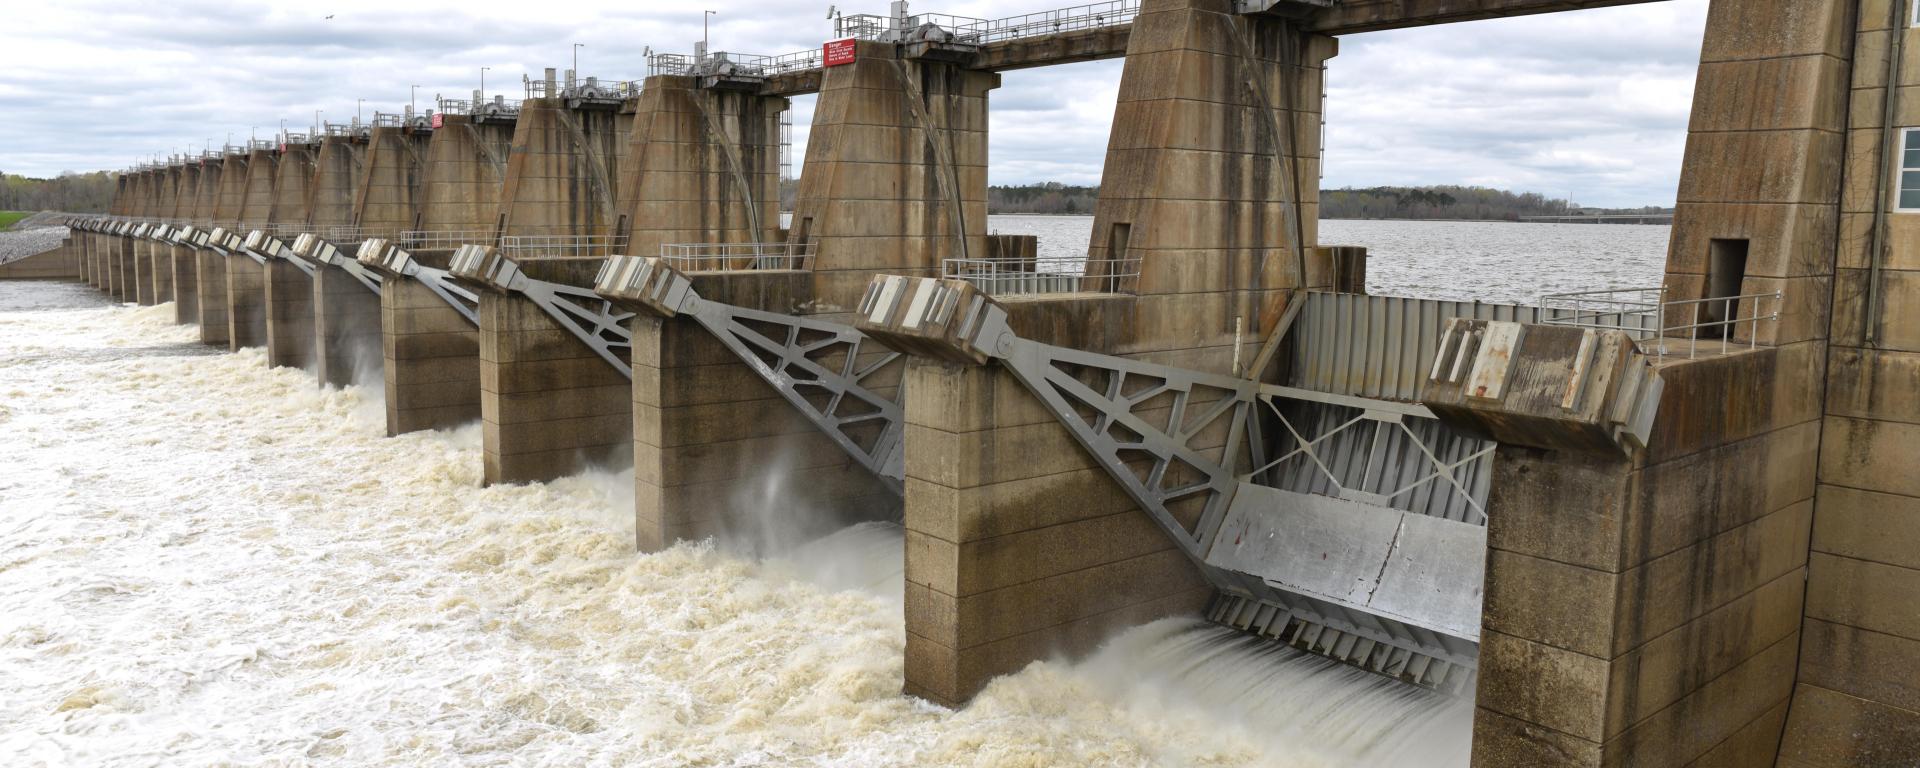 Image shows Millers Ferry Dam's hydroelectric turbines and water flowing from the upper reservoir to the lower river.